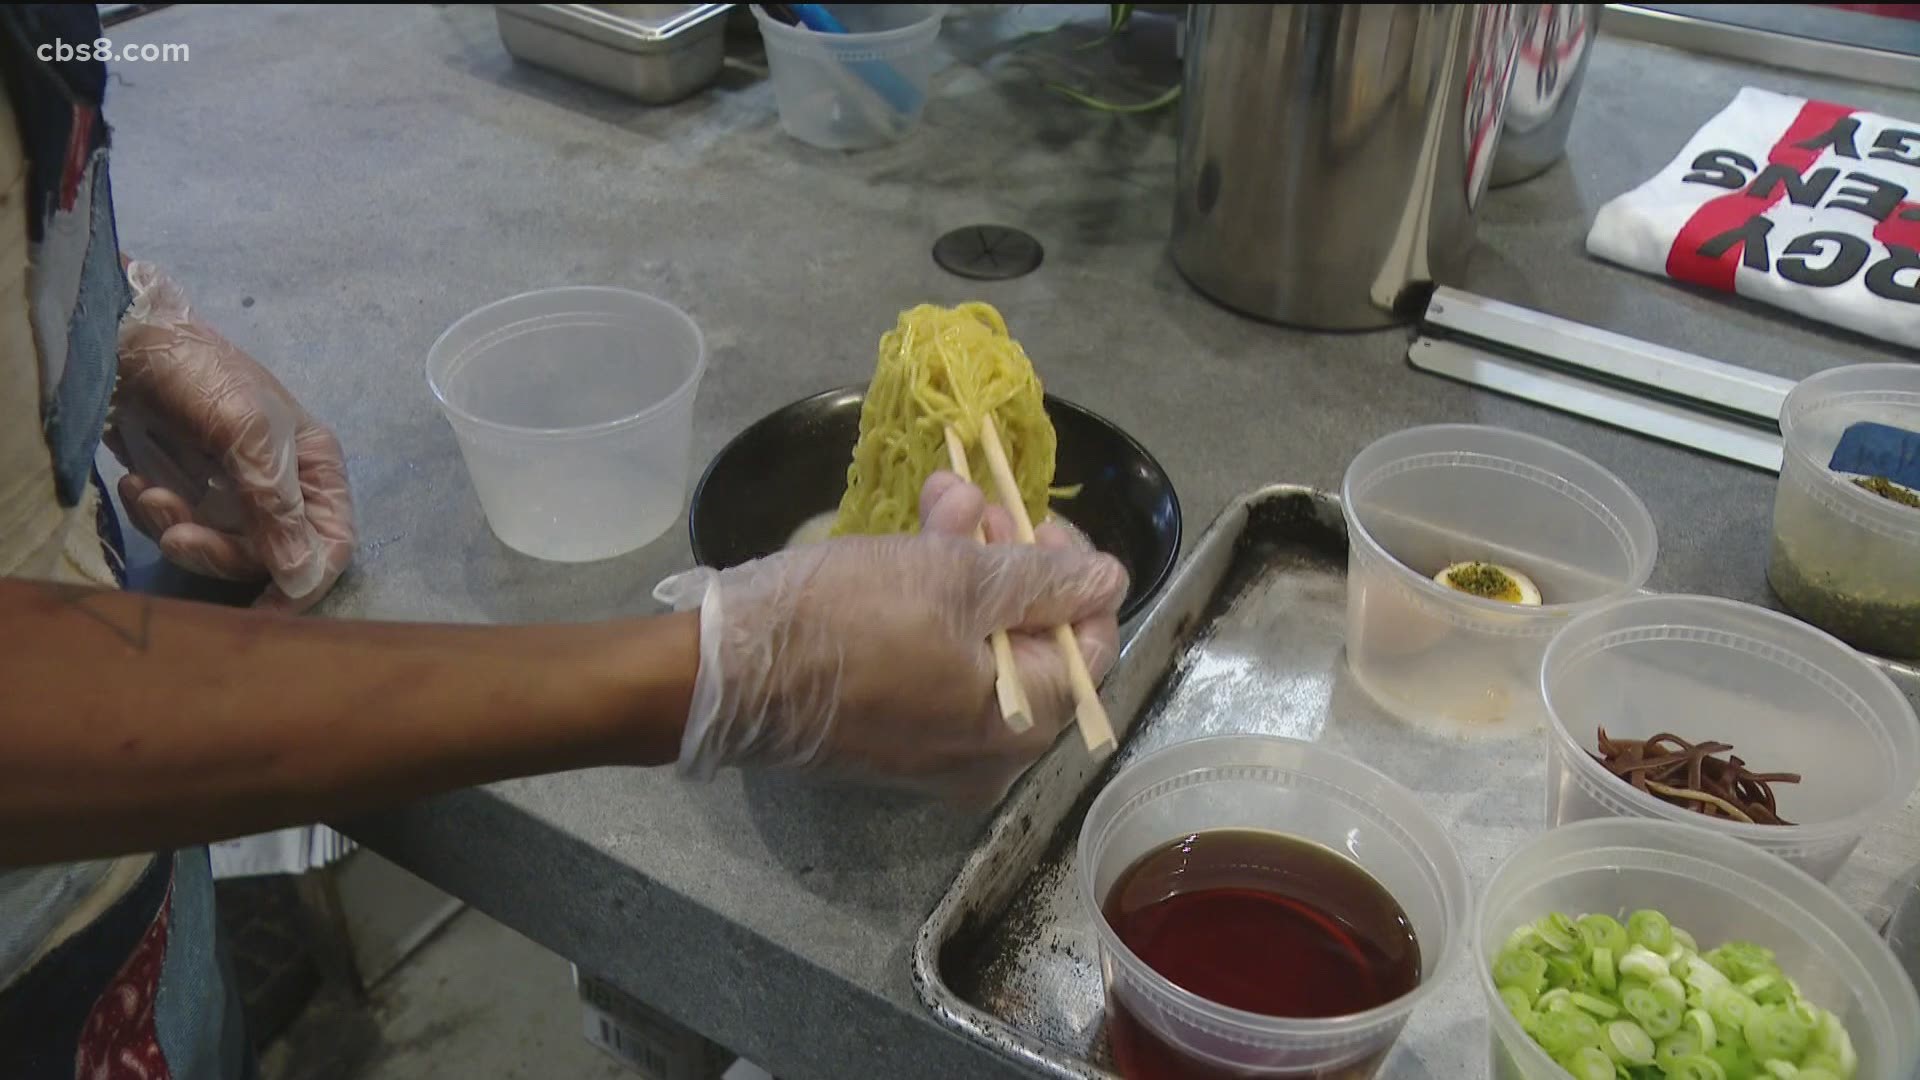 This Shop Local segment features Weapon Ramen at Liberty Public Market. They specialize in bone broth and mushroom-based broth.